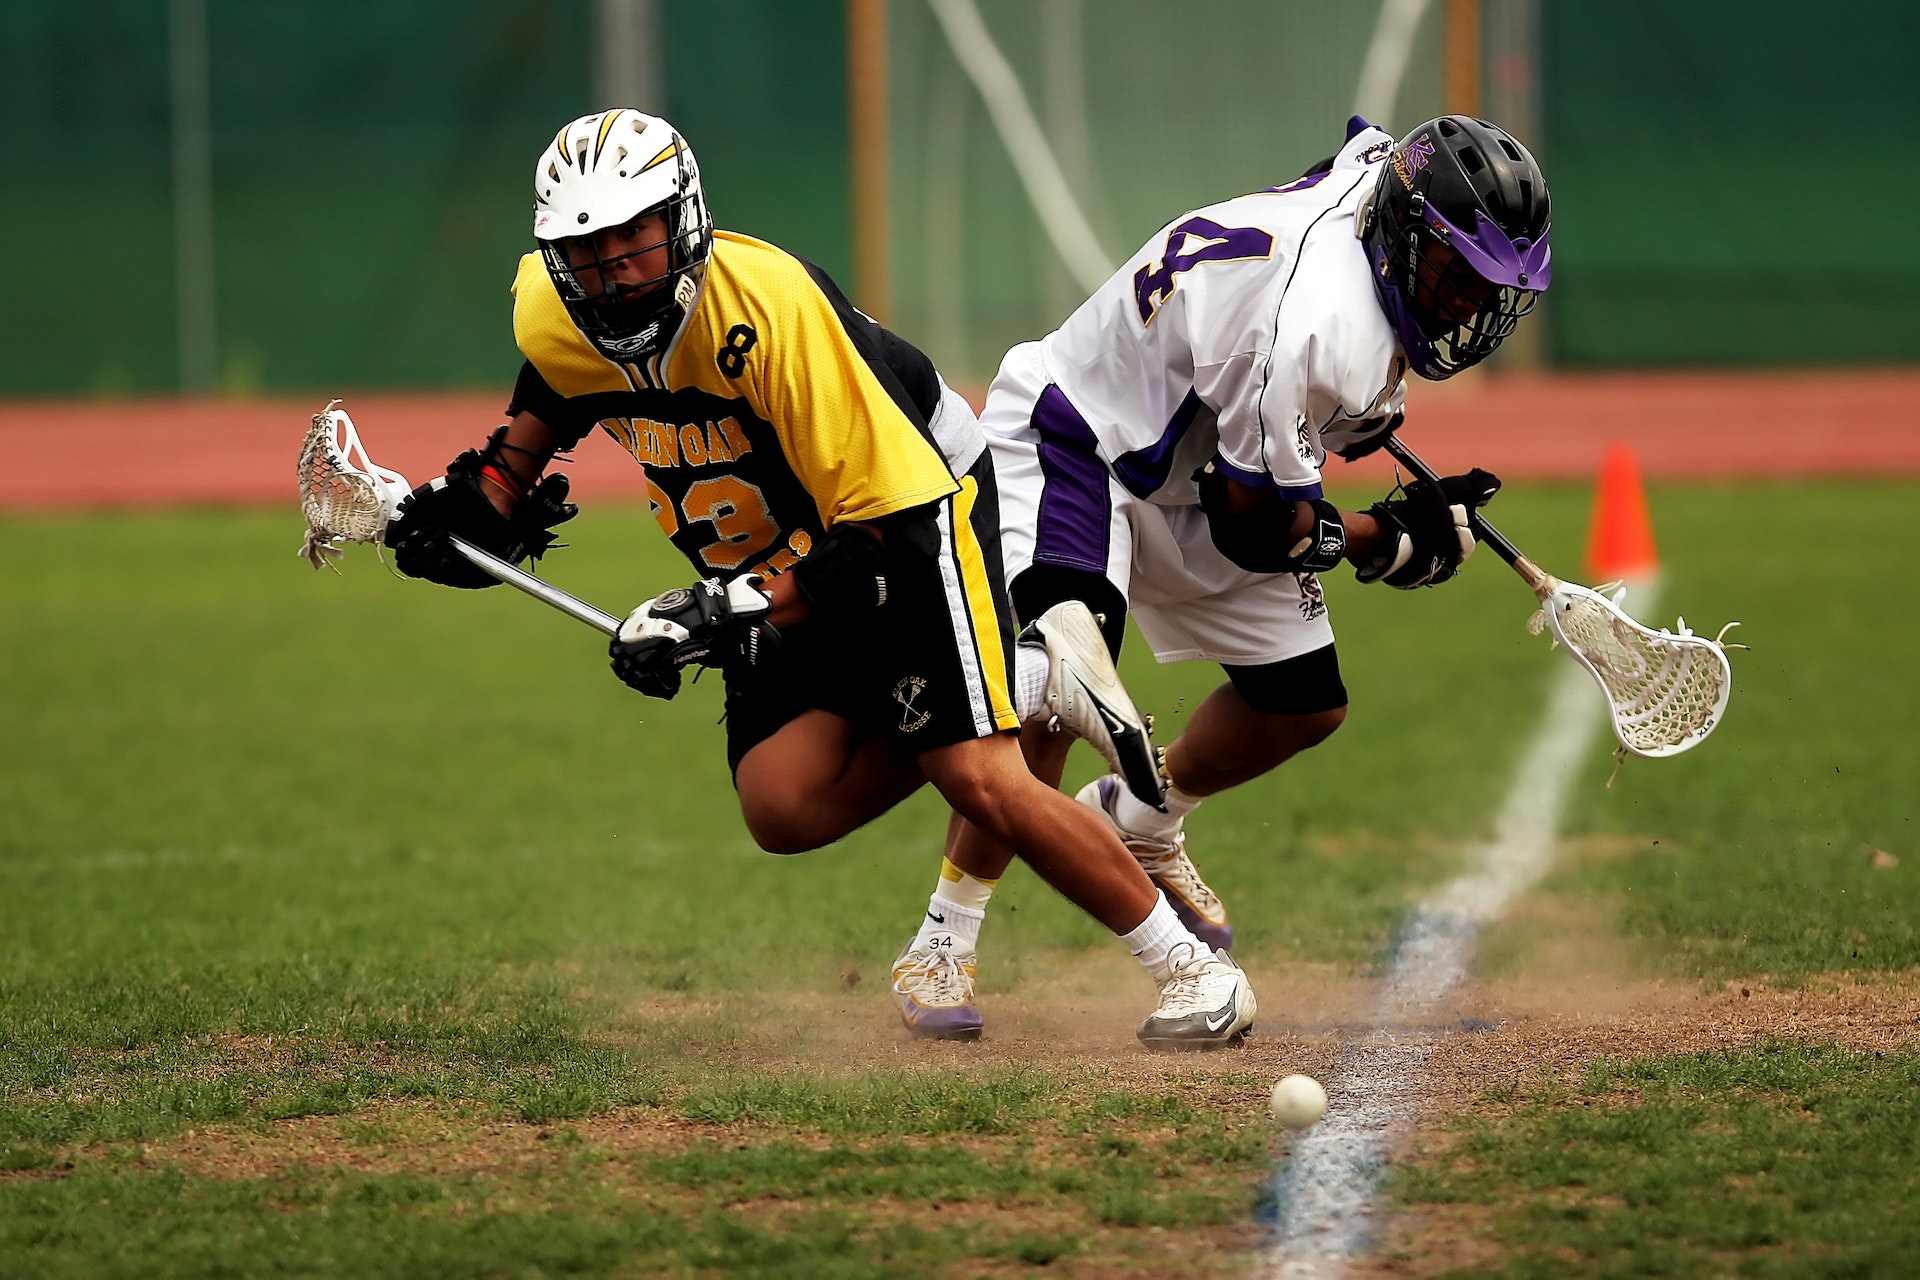 Plans to promote Lacrosse sports in schools